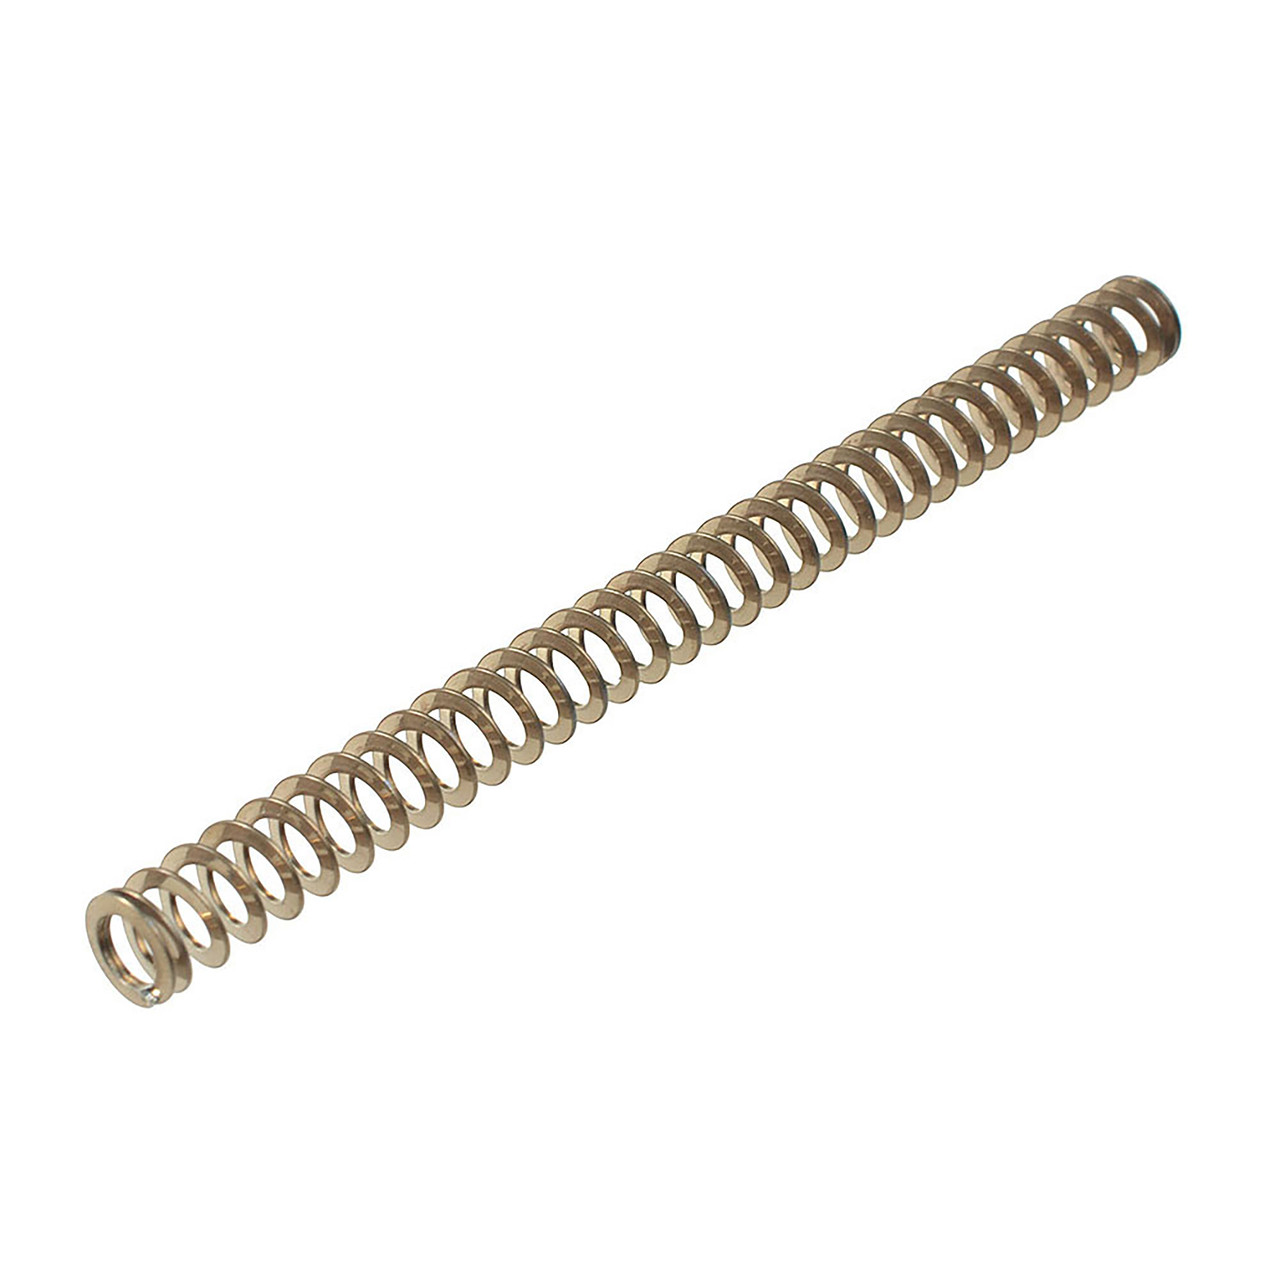 Strike Industries SI-G-RPS-13 13 lb. Reduced Power Recoil Spring for Glock